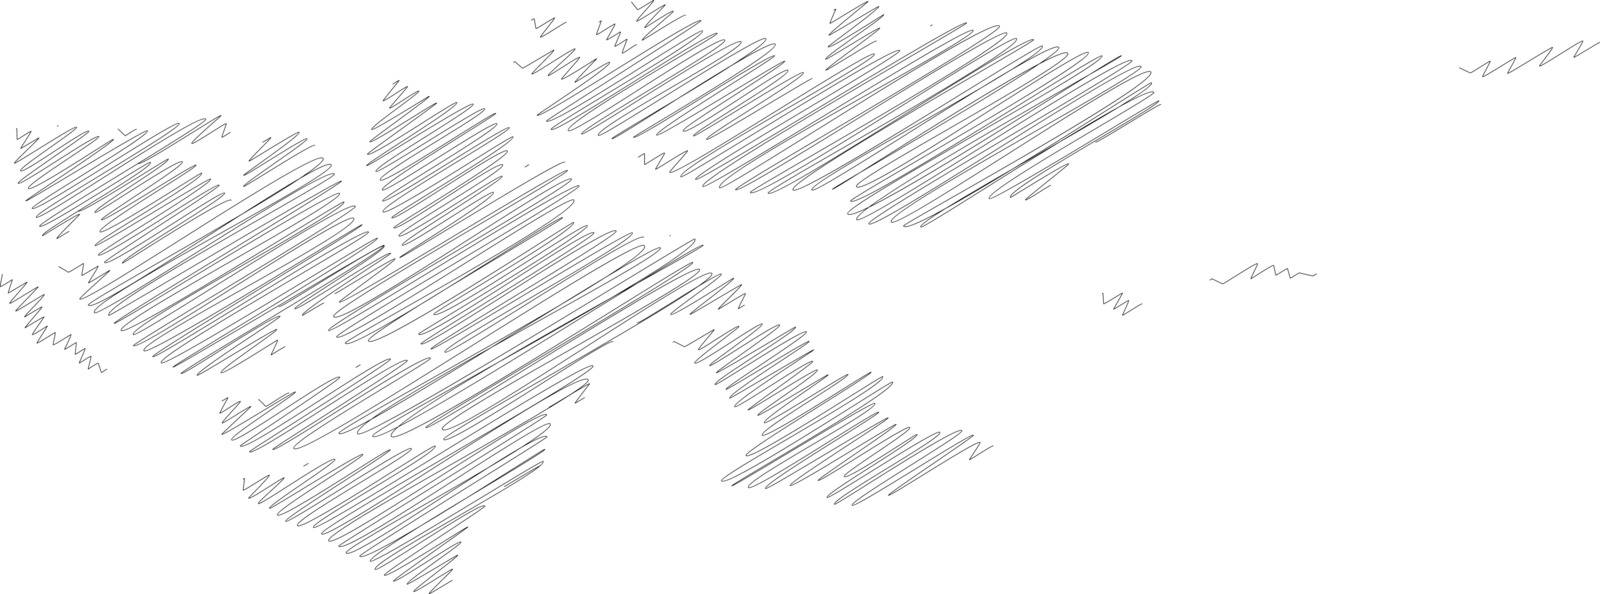 Svalbard islands - pencil scribble sketch silhouette map of country area with dropped shadow. Simple flat vector illustration.